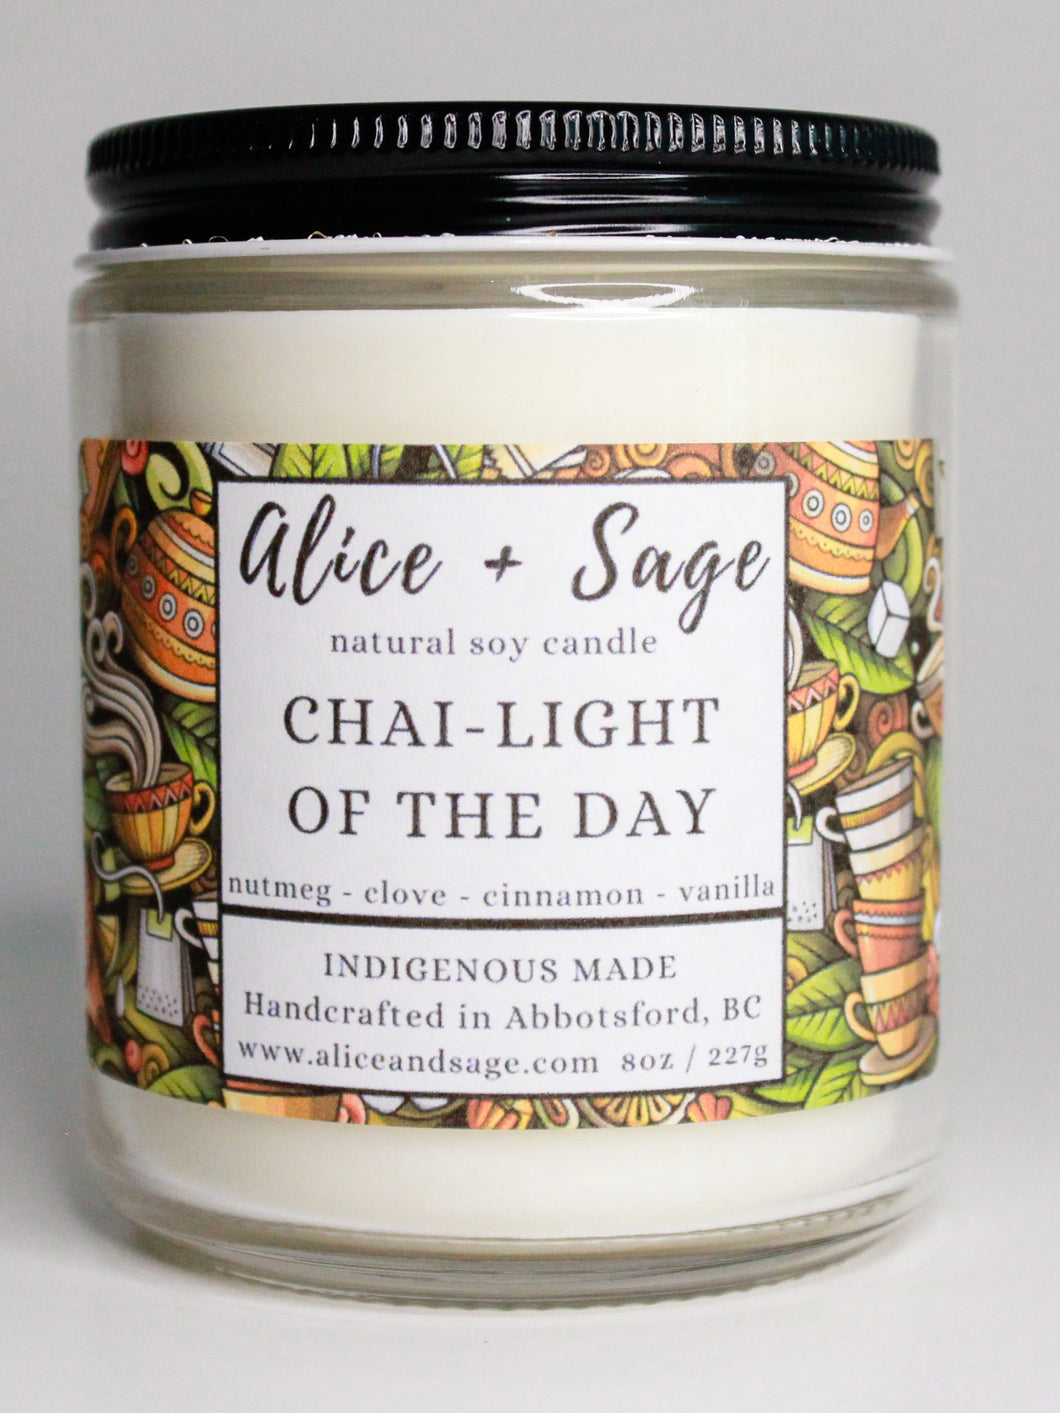 CHAI-LIGHT OF THE DAY